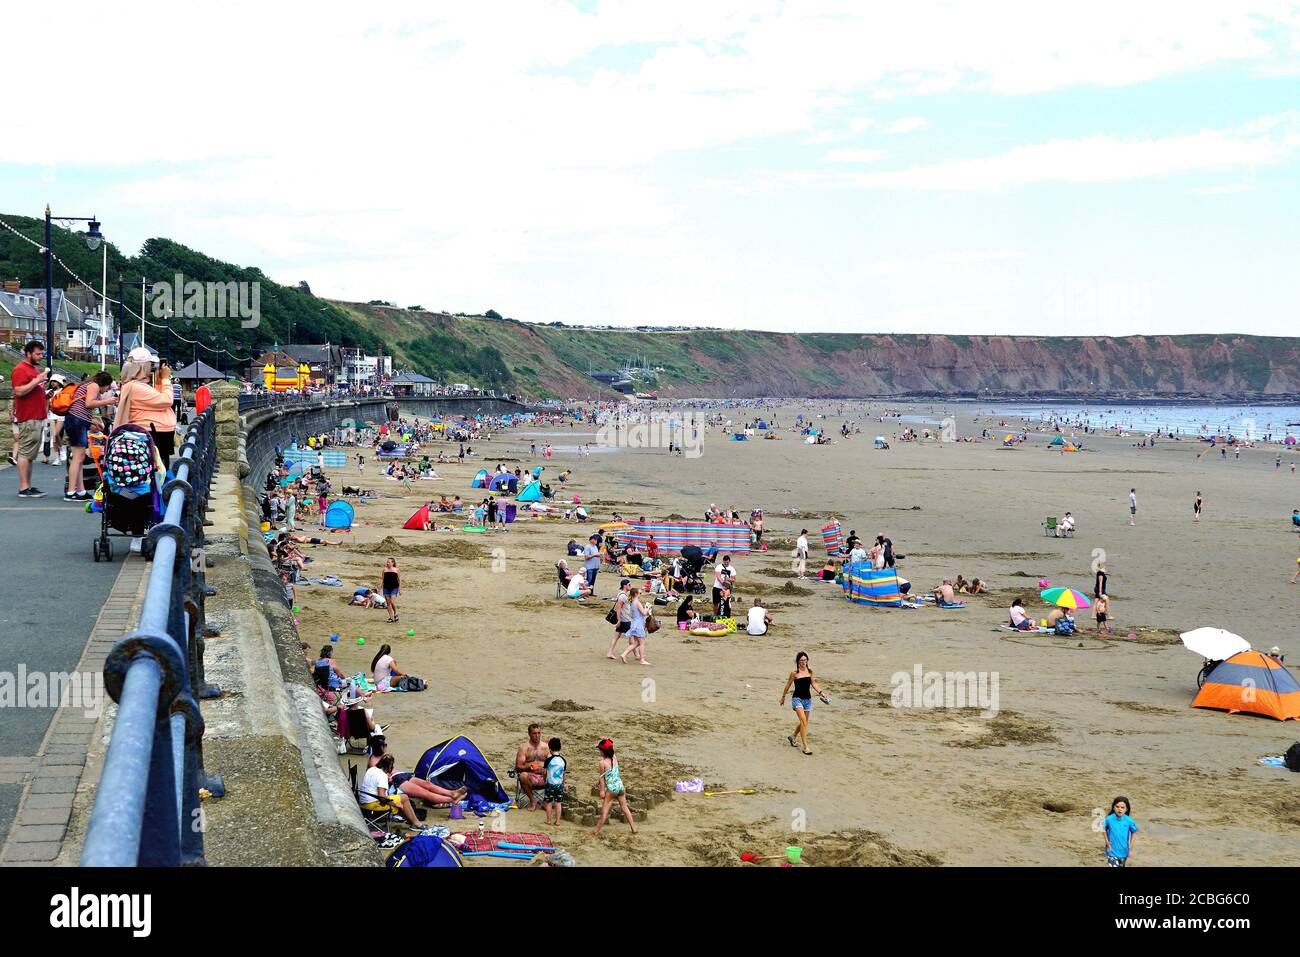 Filey, Yorkshire, UK. August 07, 2020. Holidaymakers relaxing on the beach and promenade after lockdown at Filey in Yorkshire, UK. Stock Photo